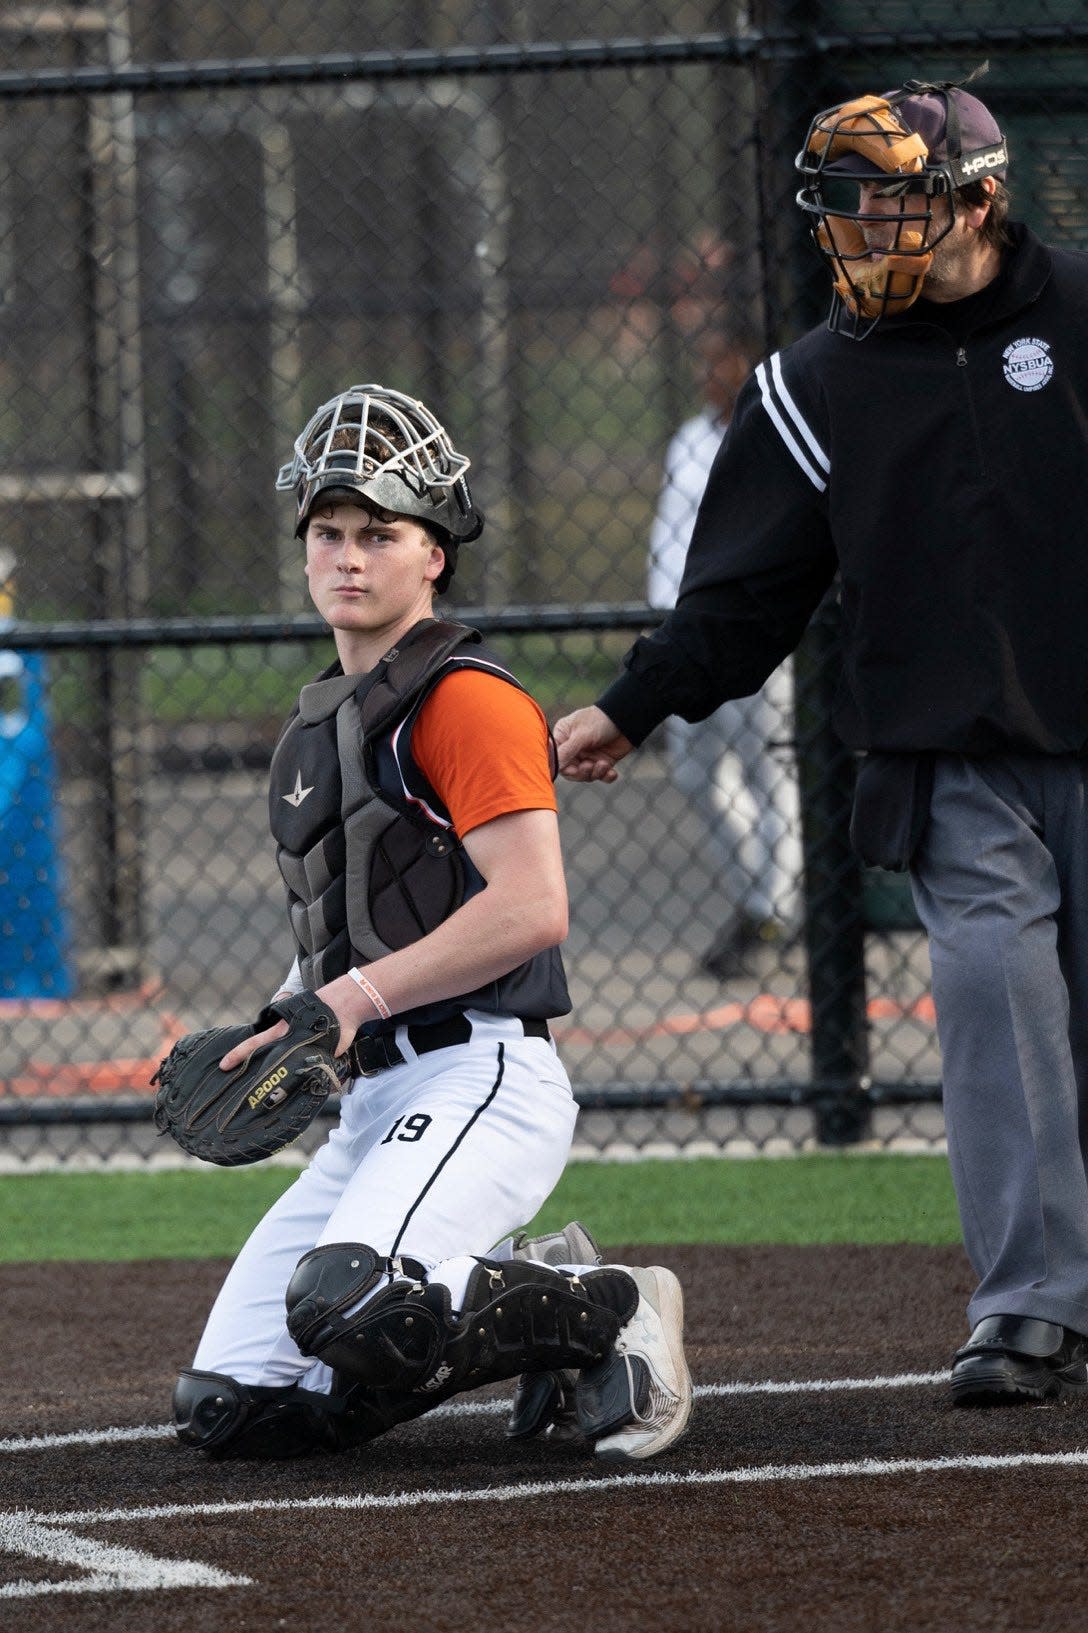 Mamaroneck catcher J.J. Grimes was named all-section and league player of the year this past season.